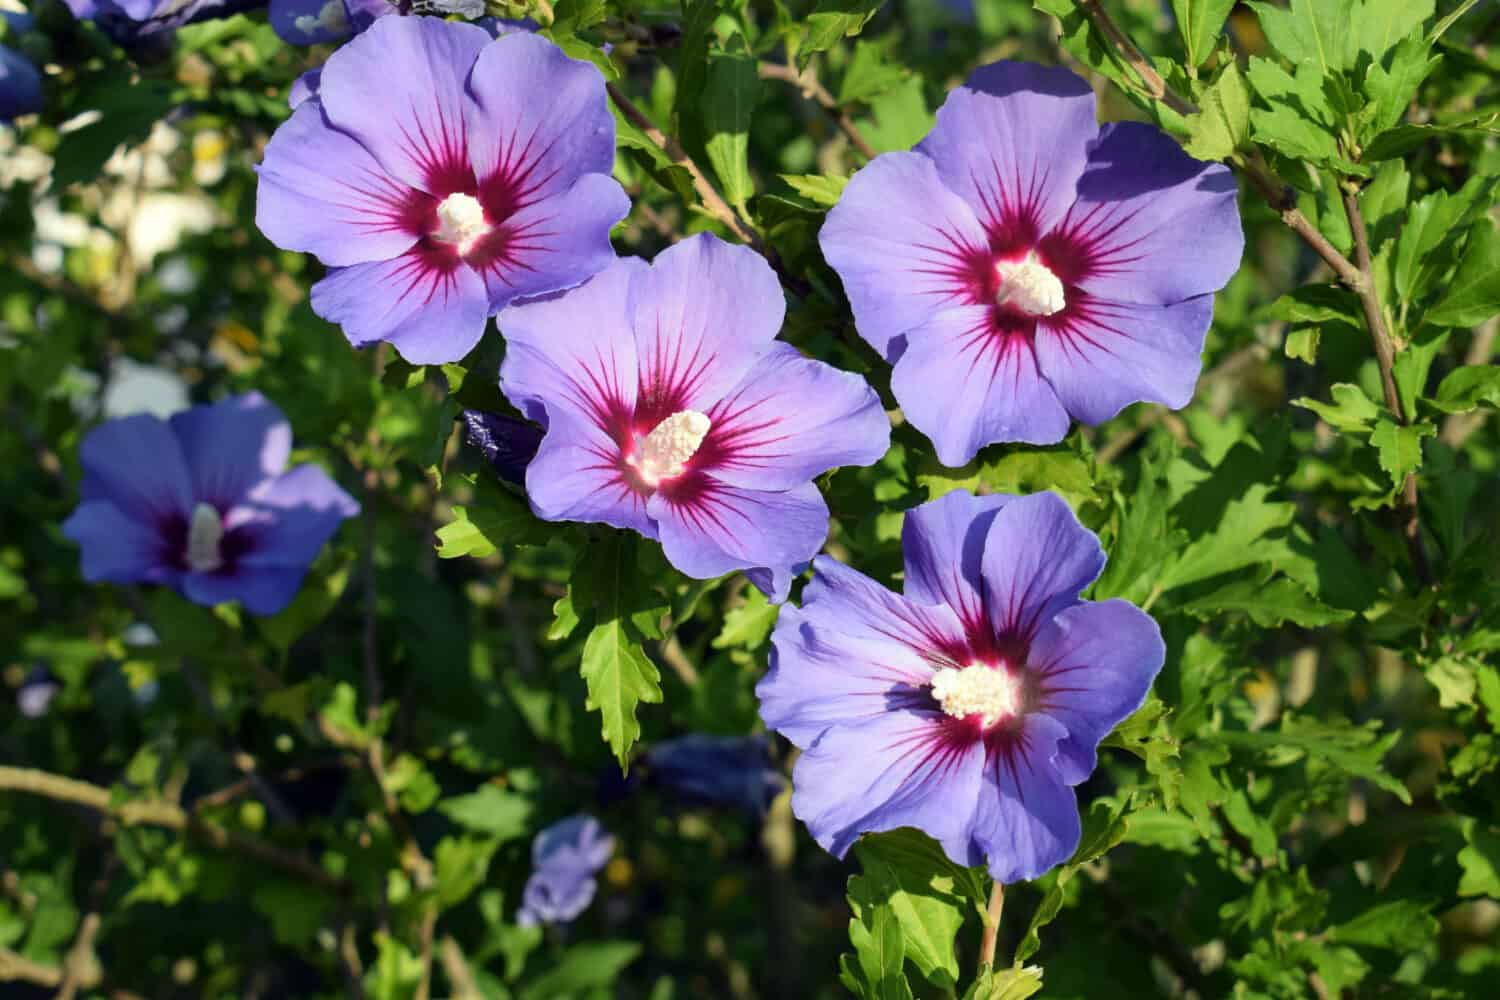 Beautifully blooming hibiscus syriacus 'Blue bird' withattractive flowers 